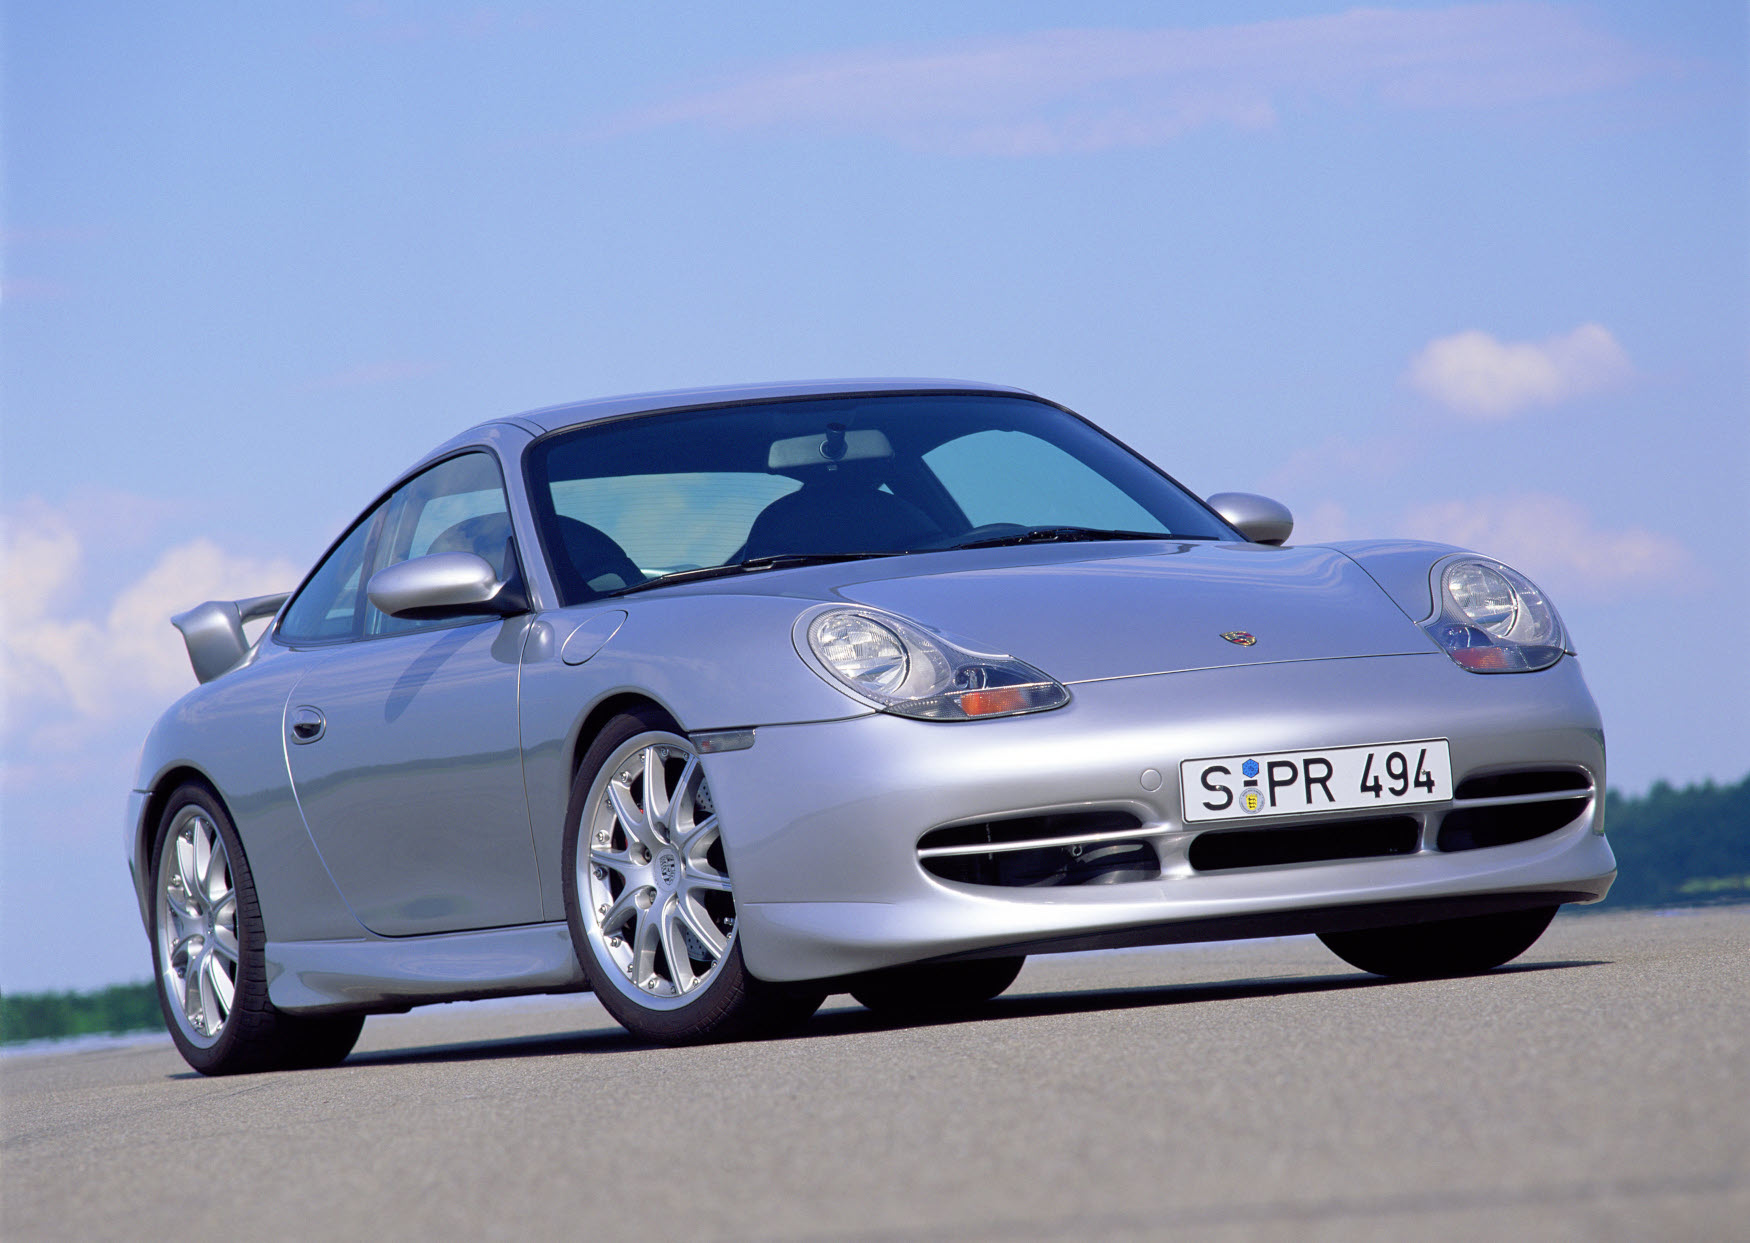 The MY 2000 Type 996.1 Porsche 911 GT3 was only sold in Europe